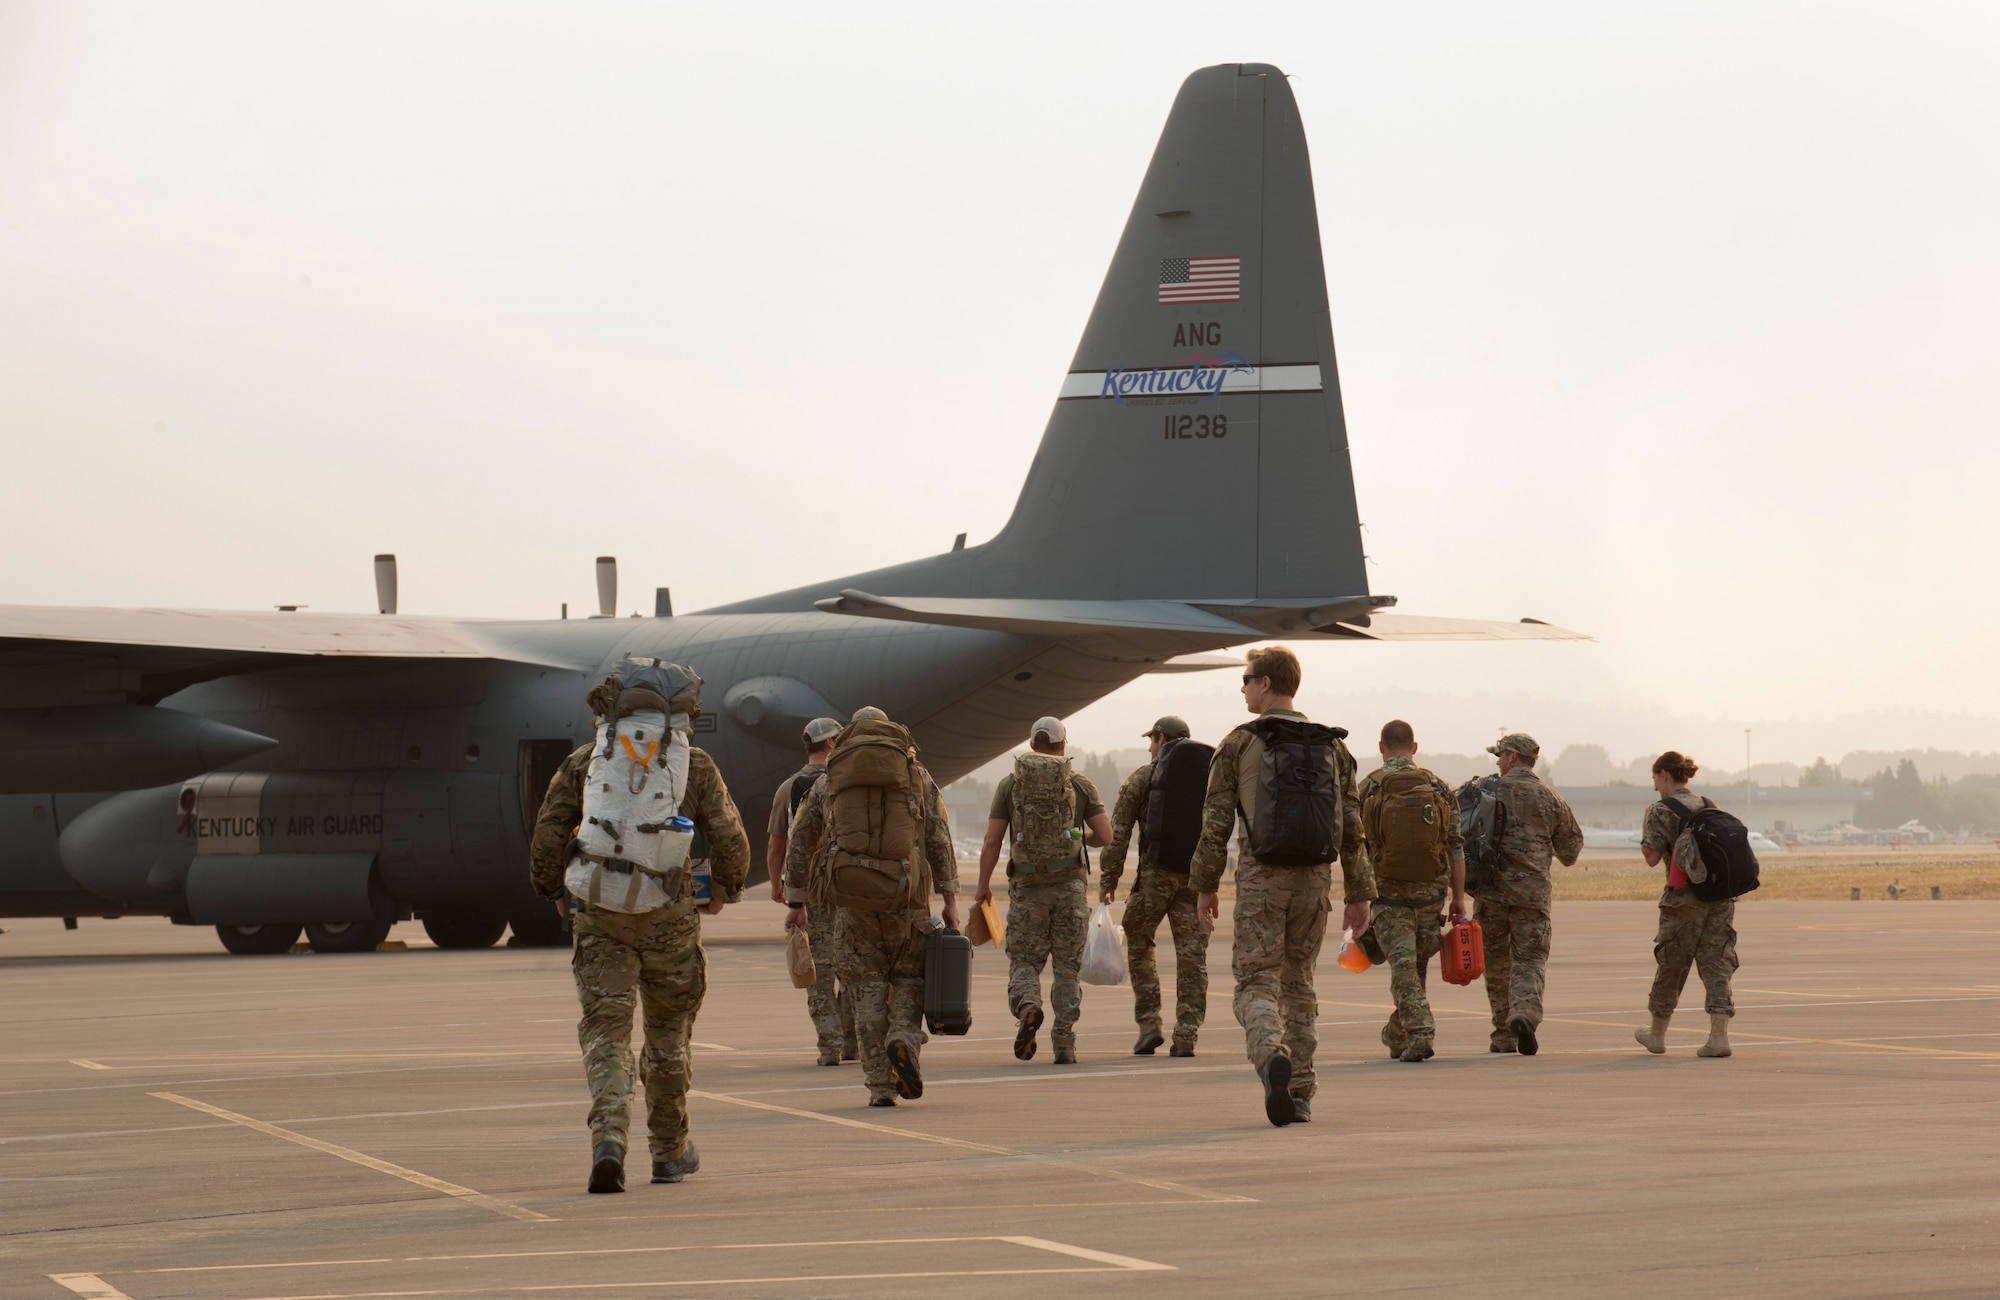 125th STS Deployment to Hurricane Relief